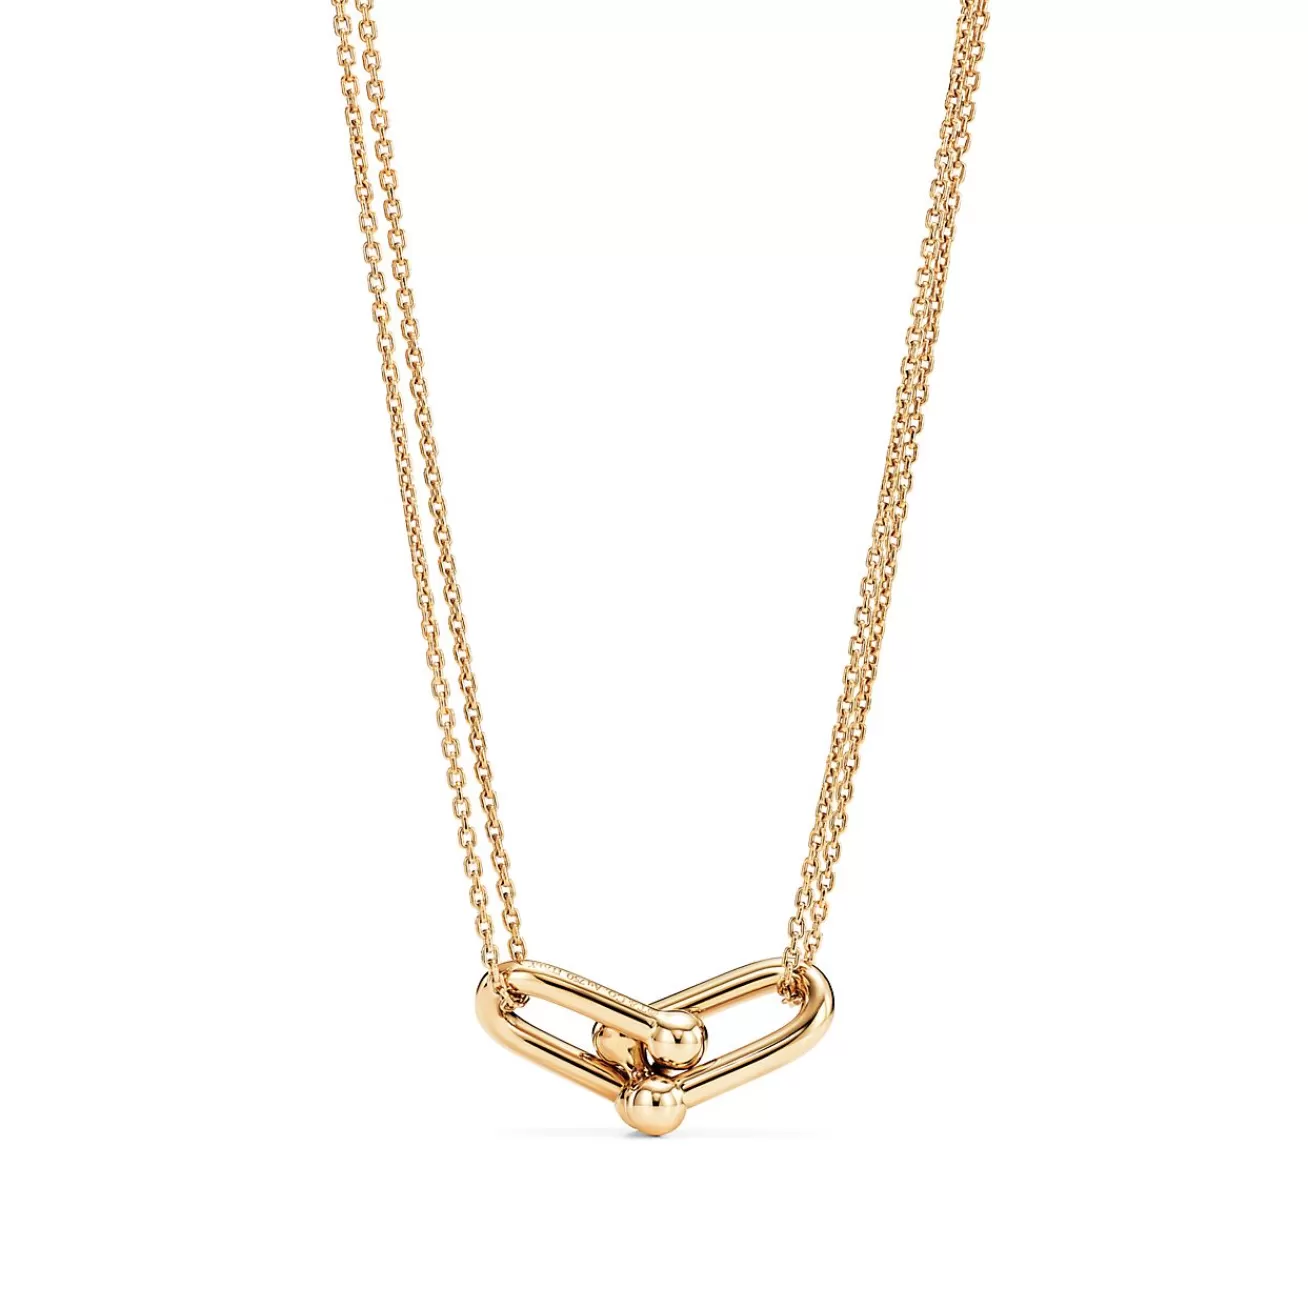 Tiffany & Co. Tiffany HardWear Large Double Link Pendant in Yellow Gold | ^ Necklaces & Pendants | Gifts for Her